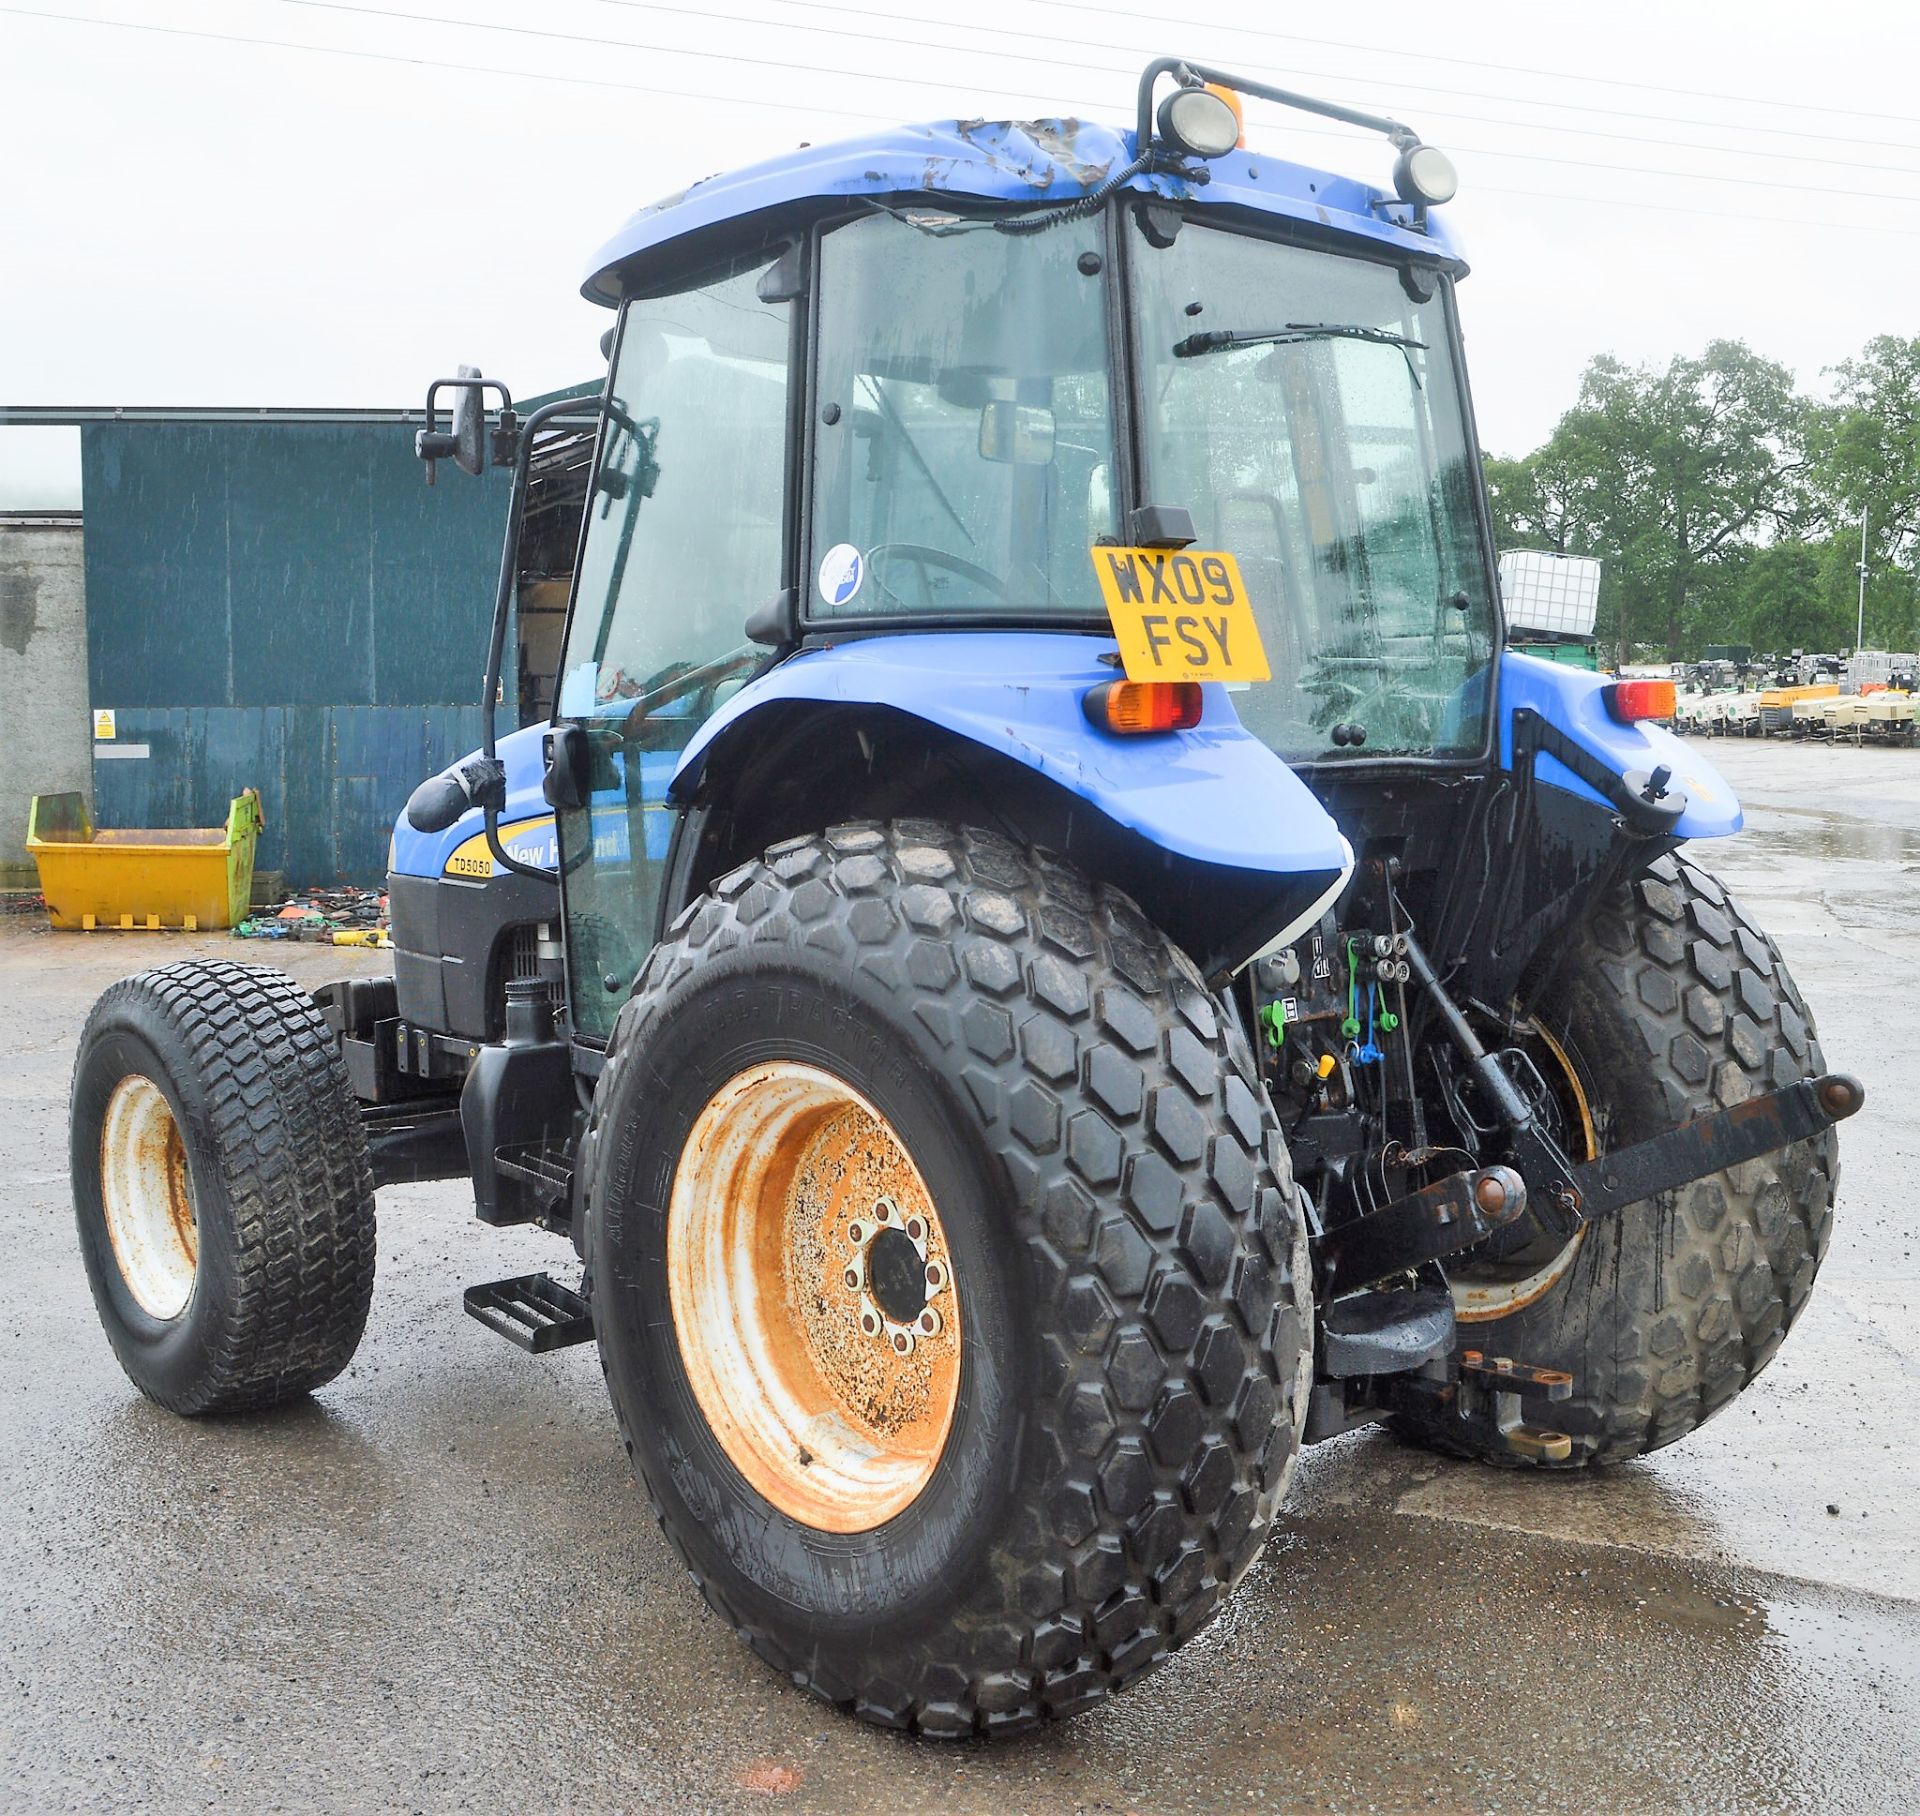 New Holland TD5050 4 wheel drive tractor  Year: WX09FSY Rec Hours: 1539 c/w V5C registration - Image 2 of 9